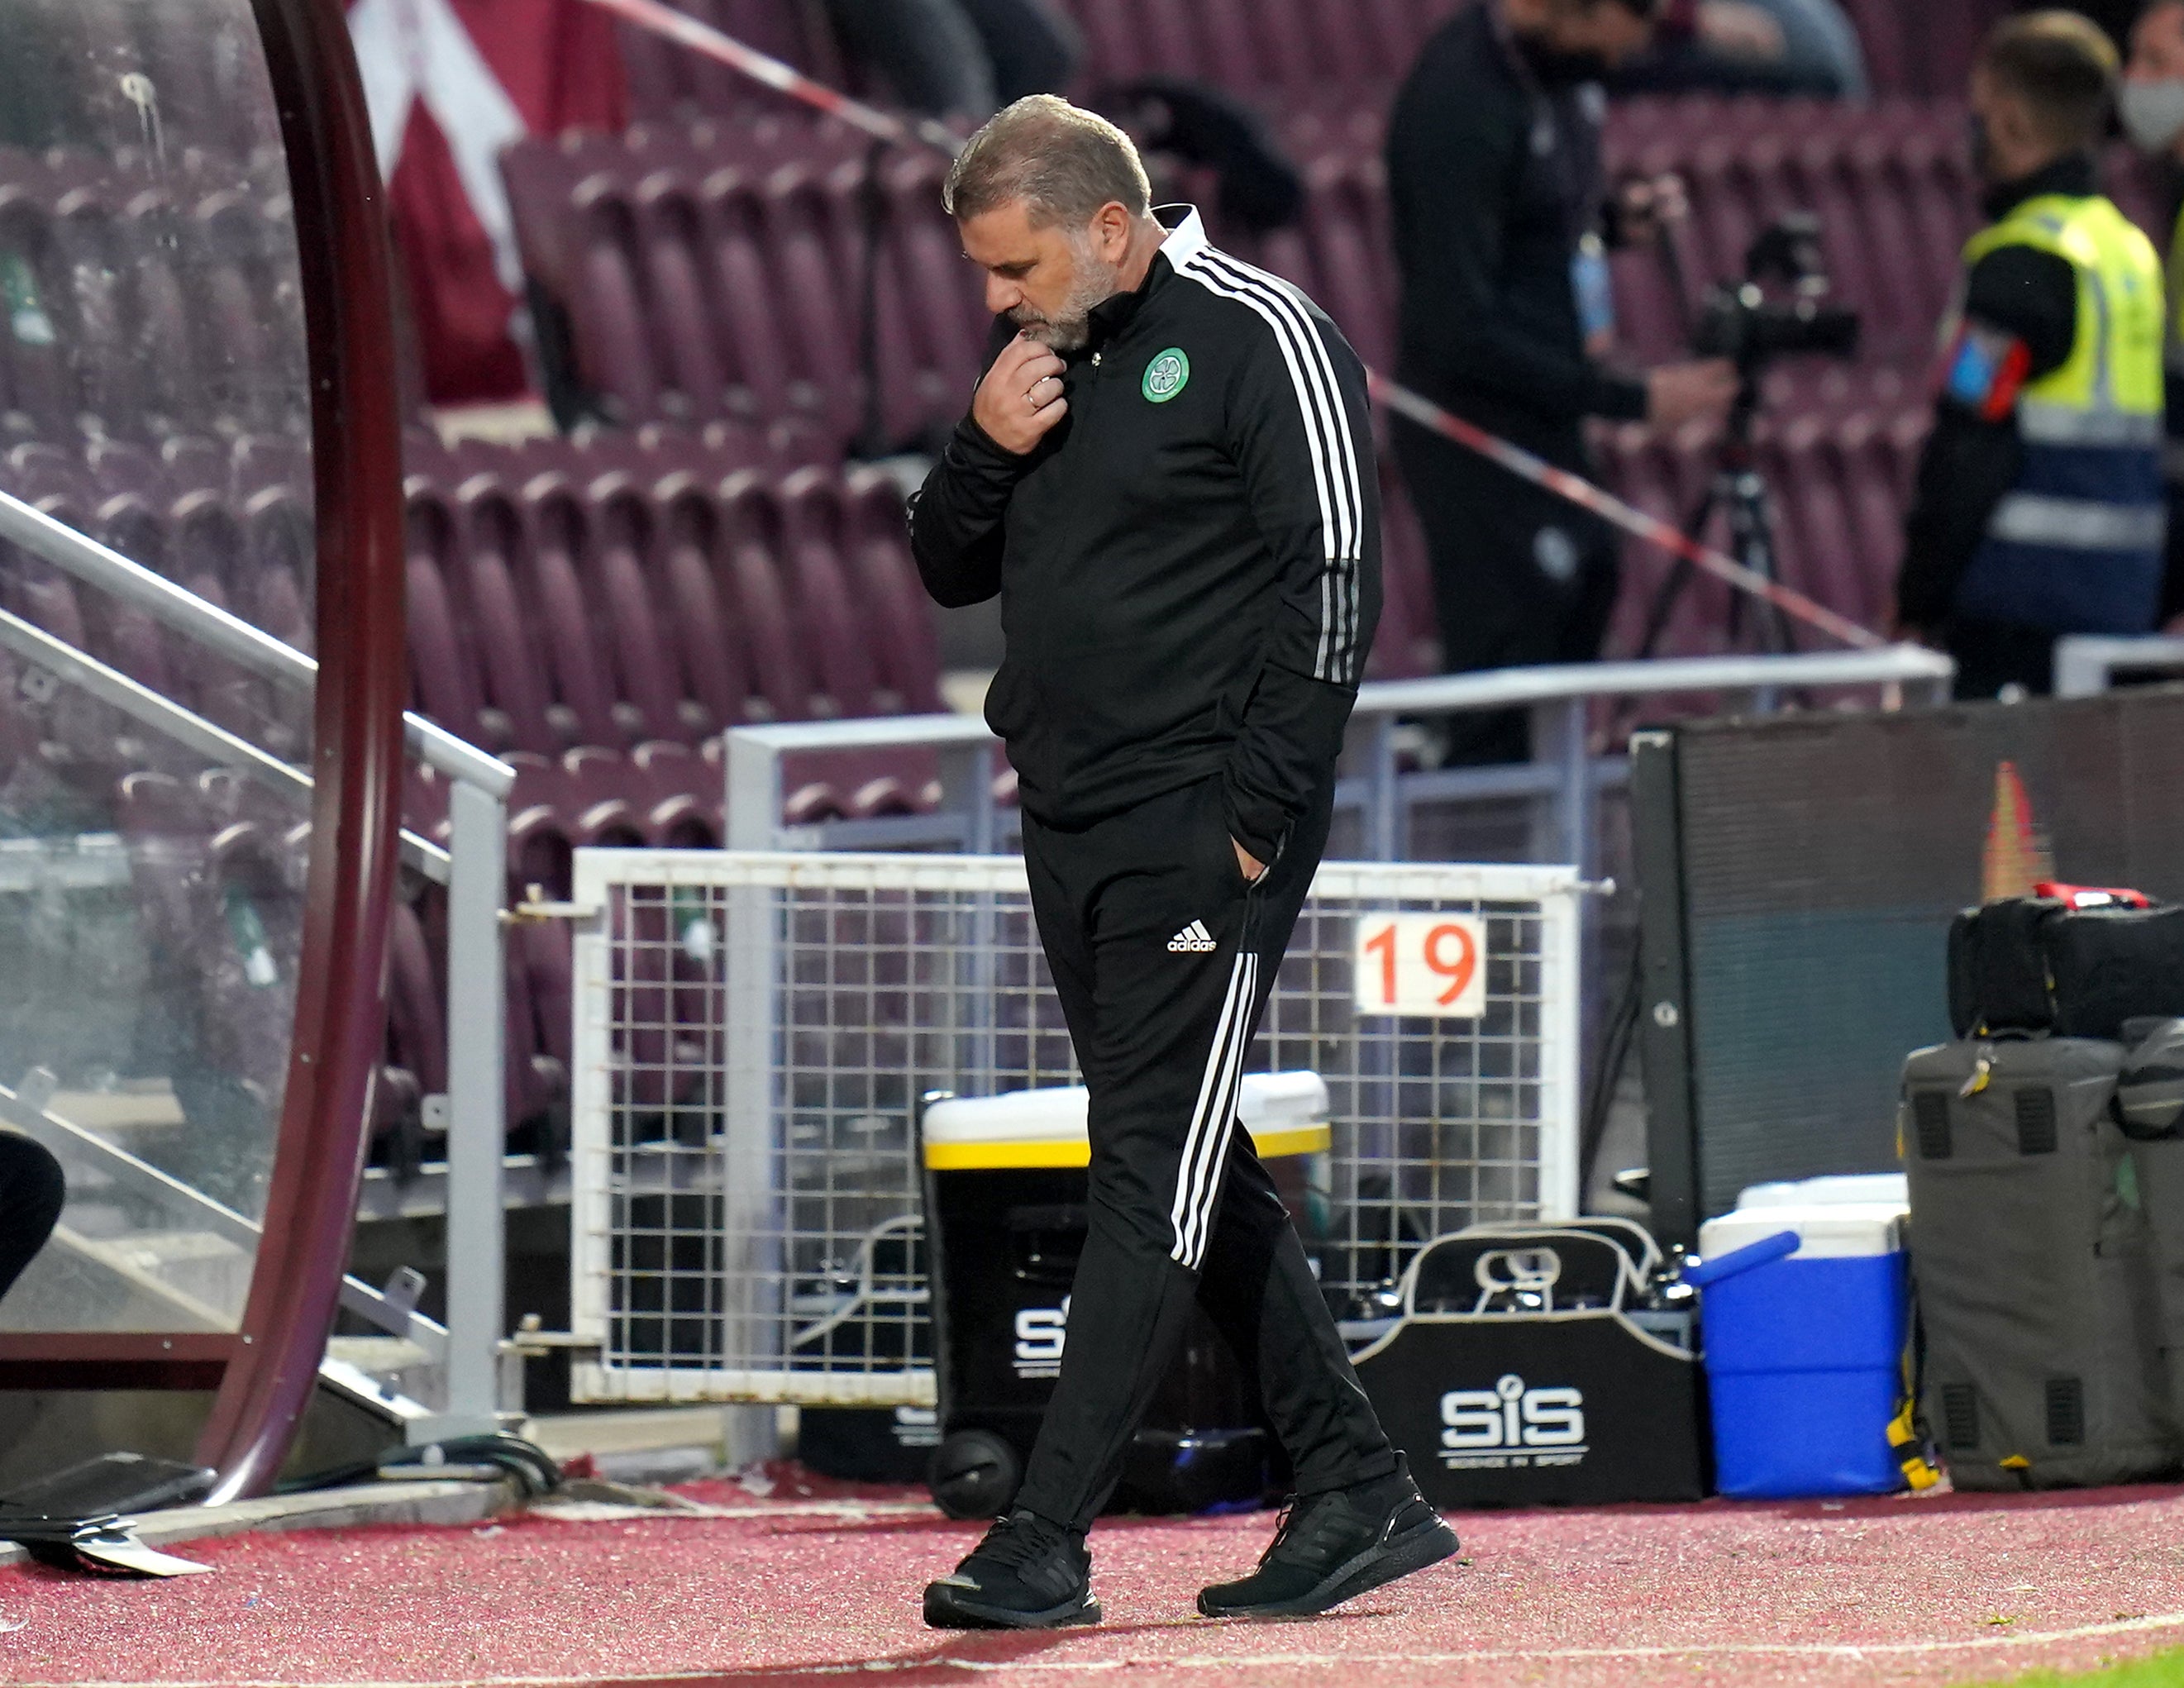 Celtic manager Ange Postecoglou looks frustrated after falling to a 2-1 defeat to Hearts in their cinch Premiership opener (Jane Barlow/PA)